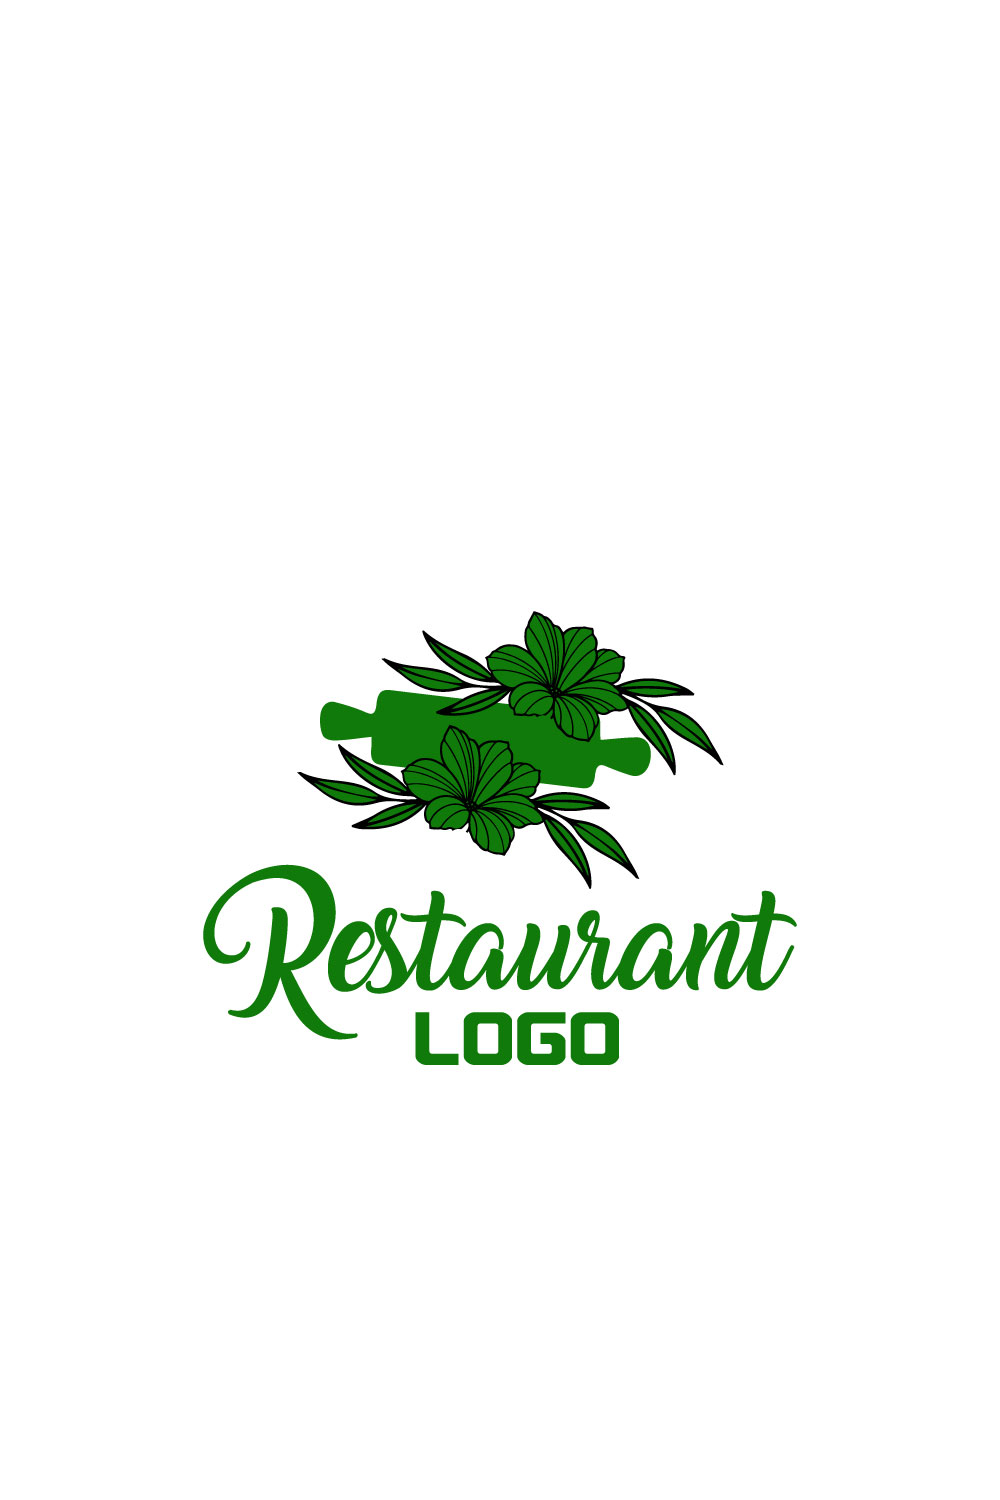 Free home cooking logo pinterest preview image.